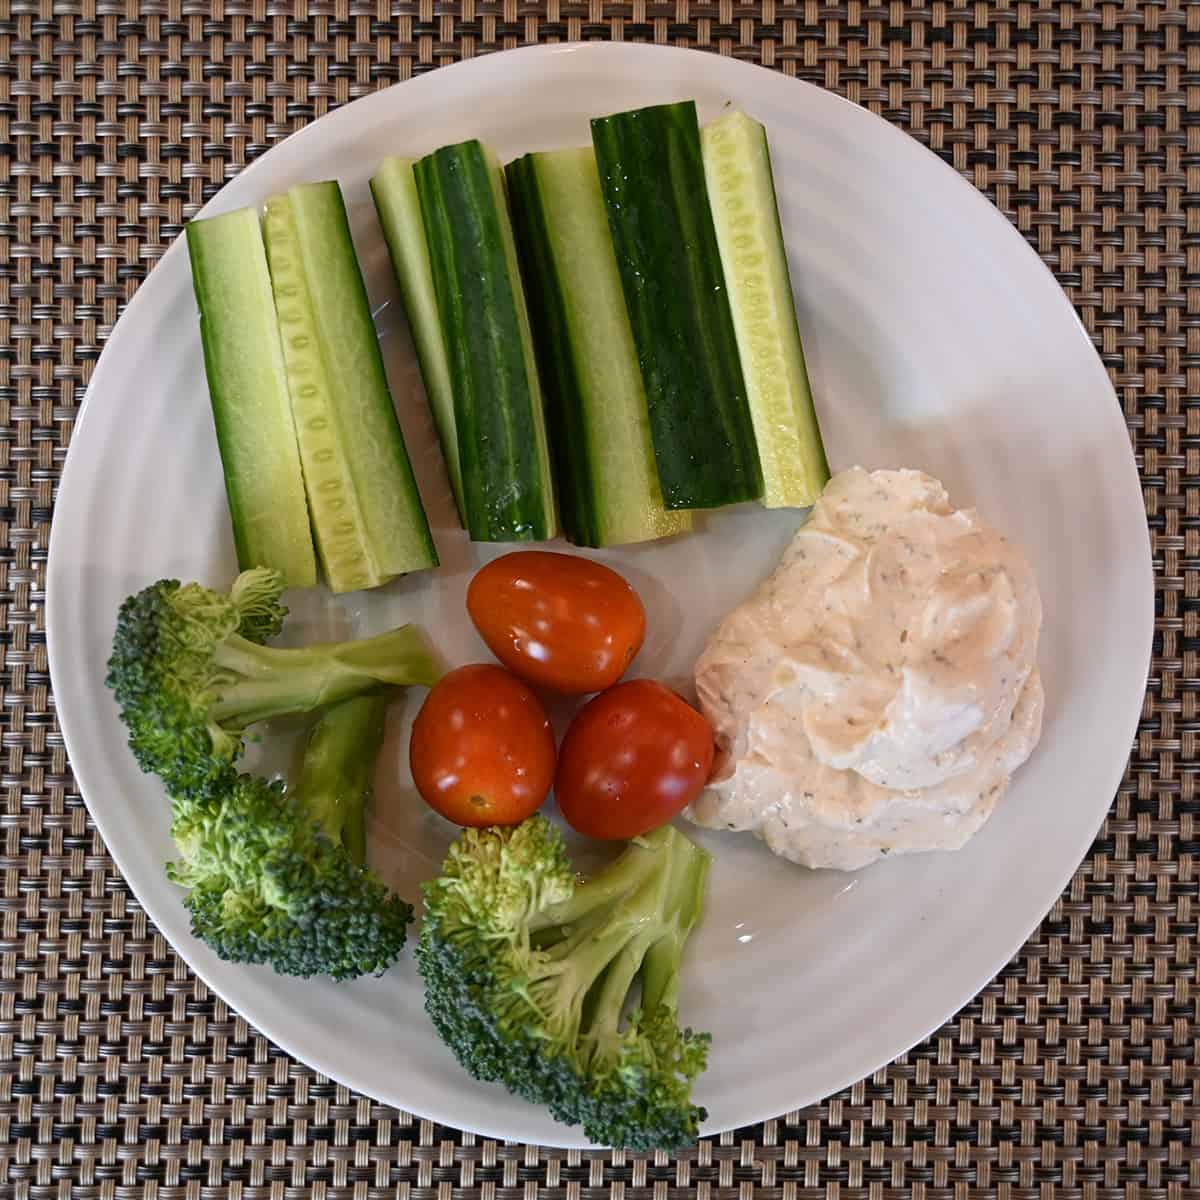 Top down image of a plate of vegetables with dip beside them.